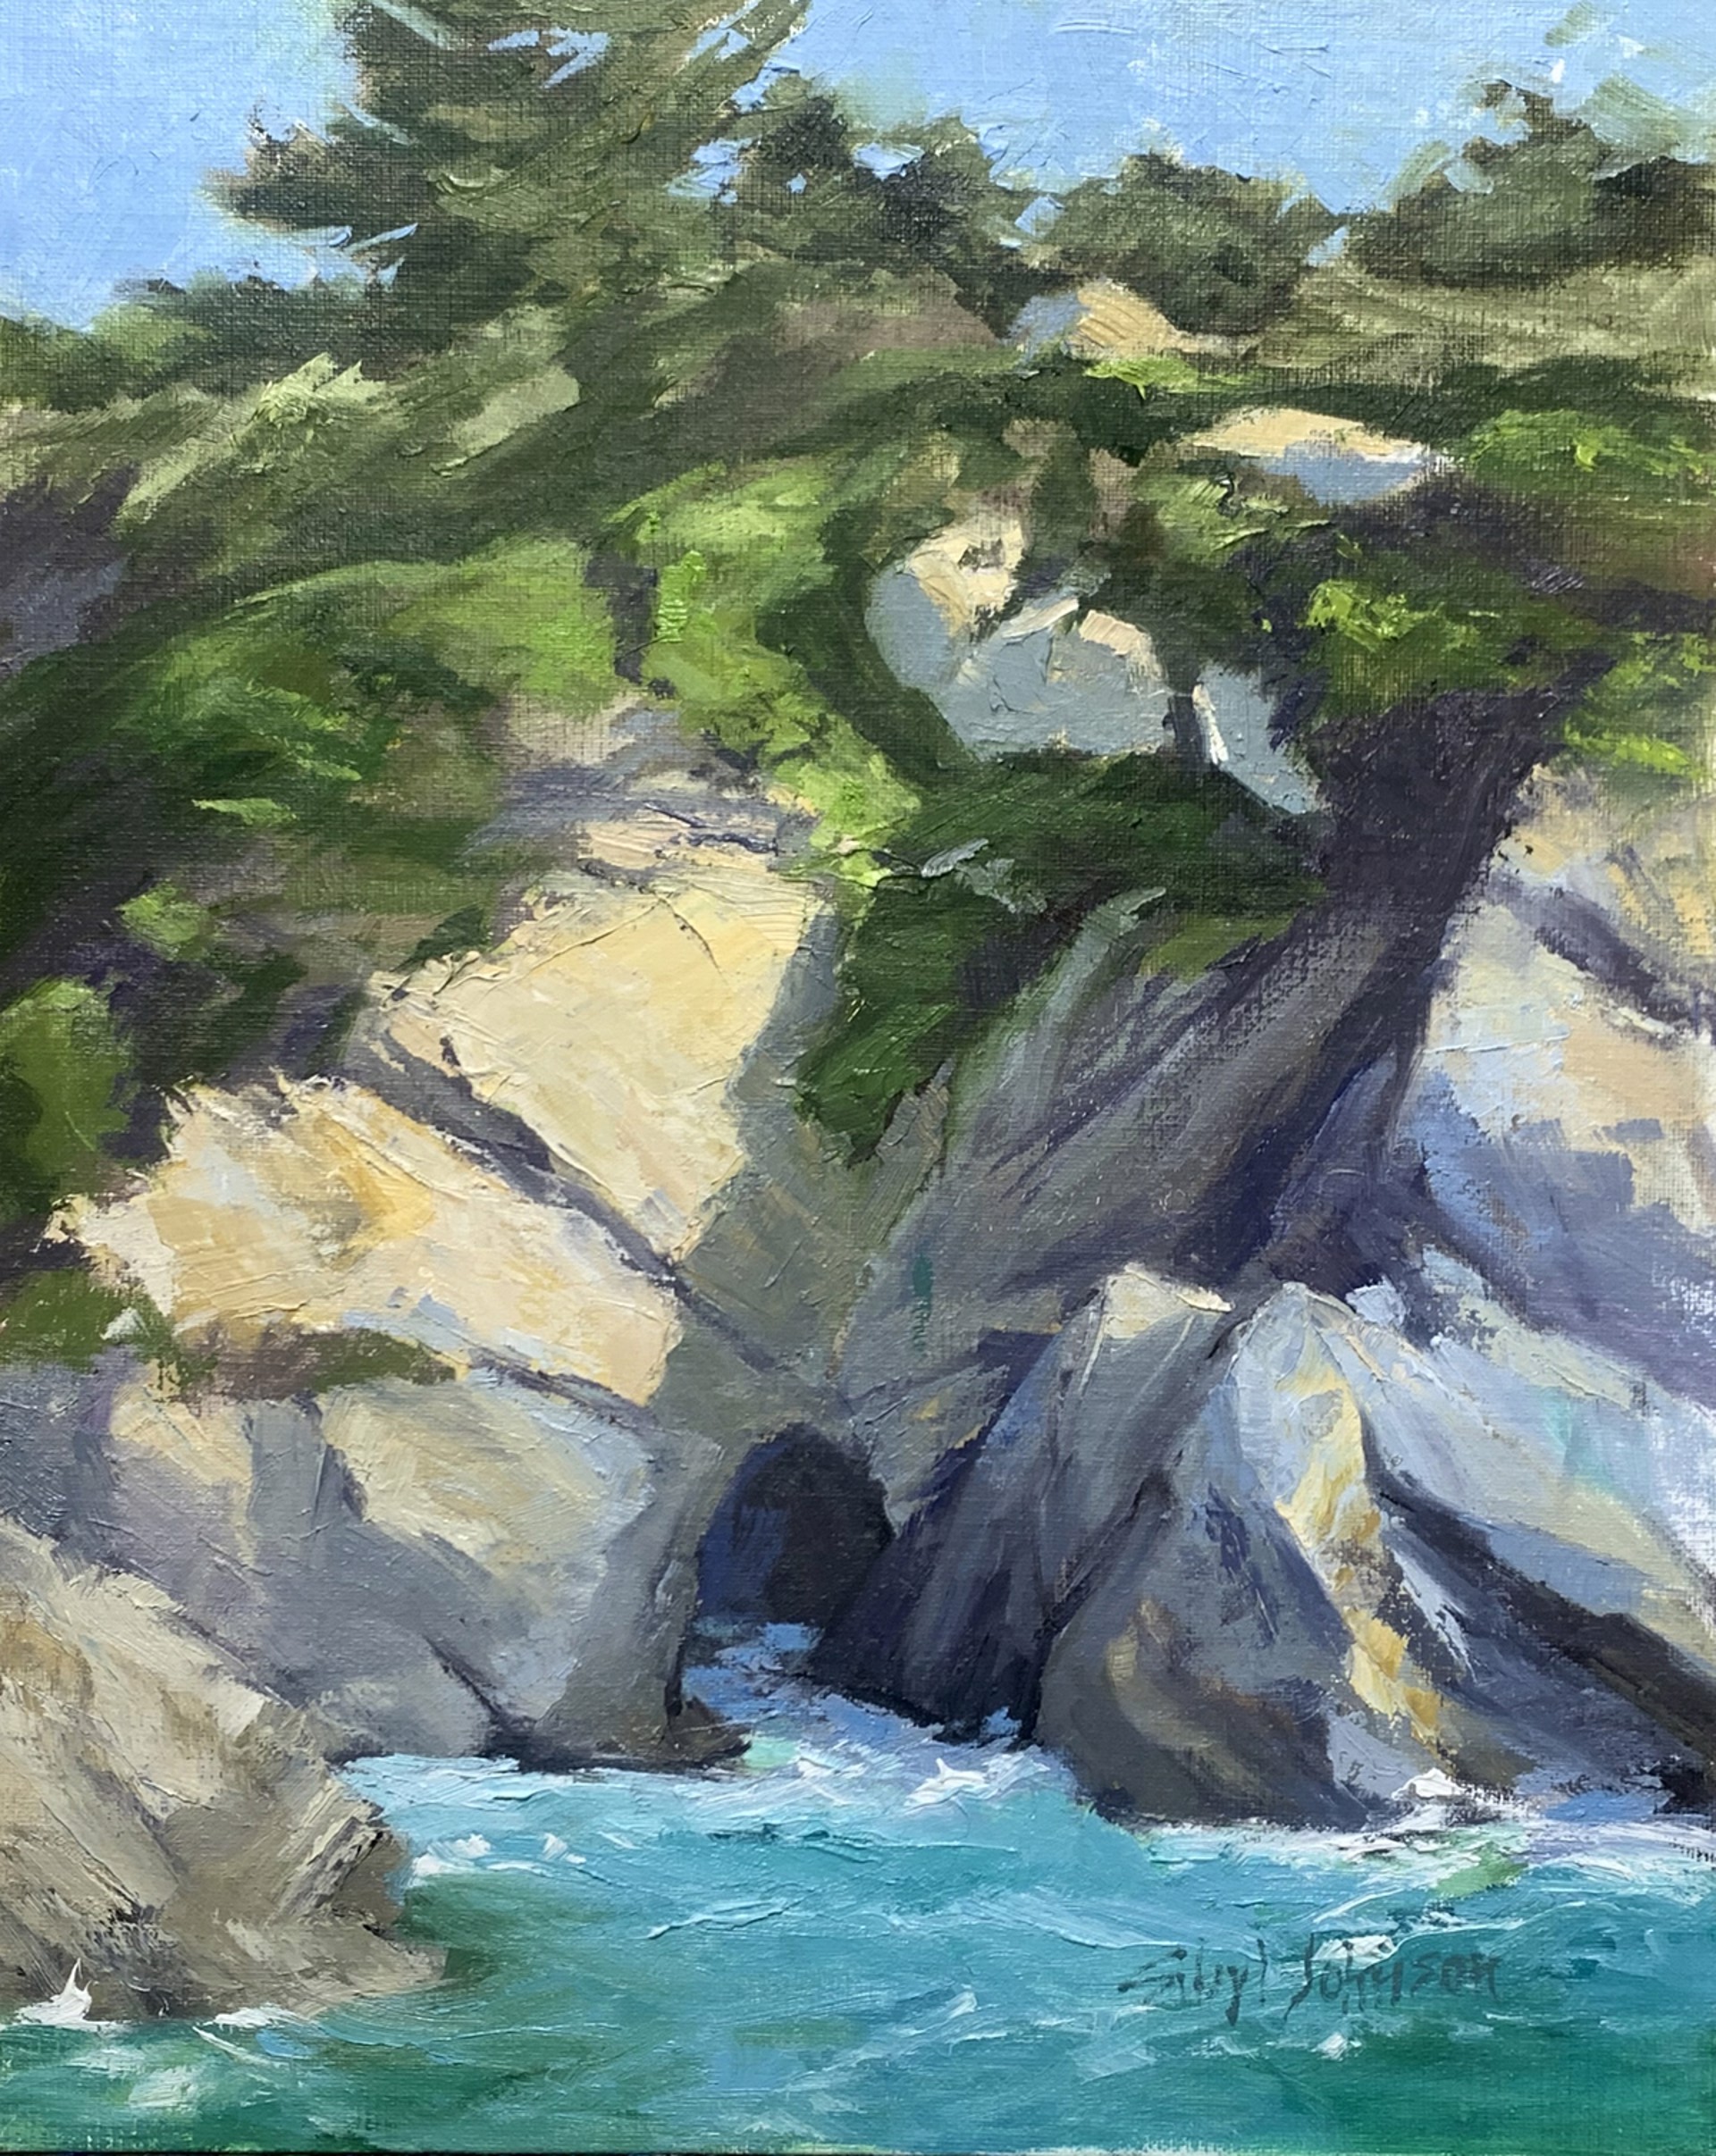 The Other Side of China Cove 2 by Sibyl Johnson